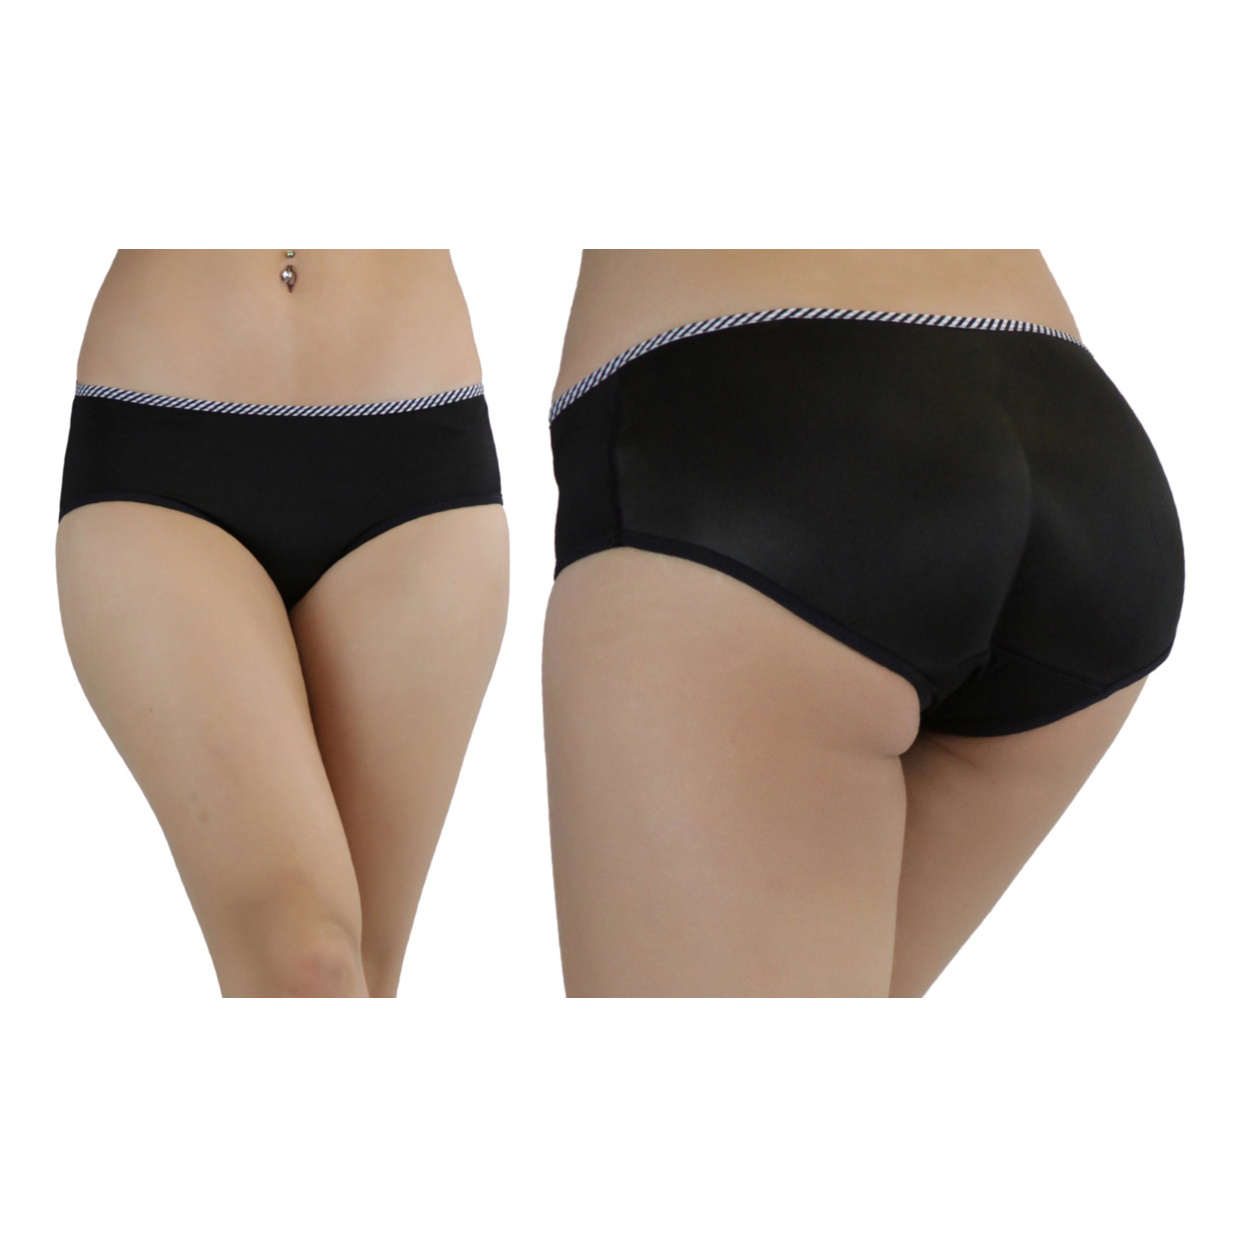 Women's Instant Booty Boosters Padded Panty - Black, XS